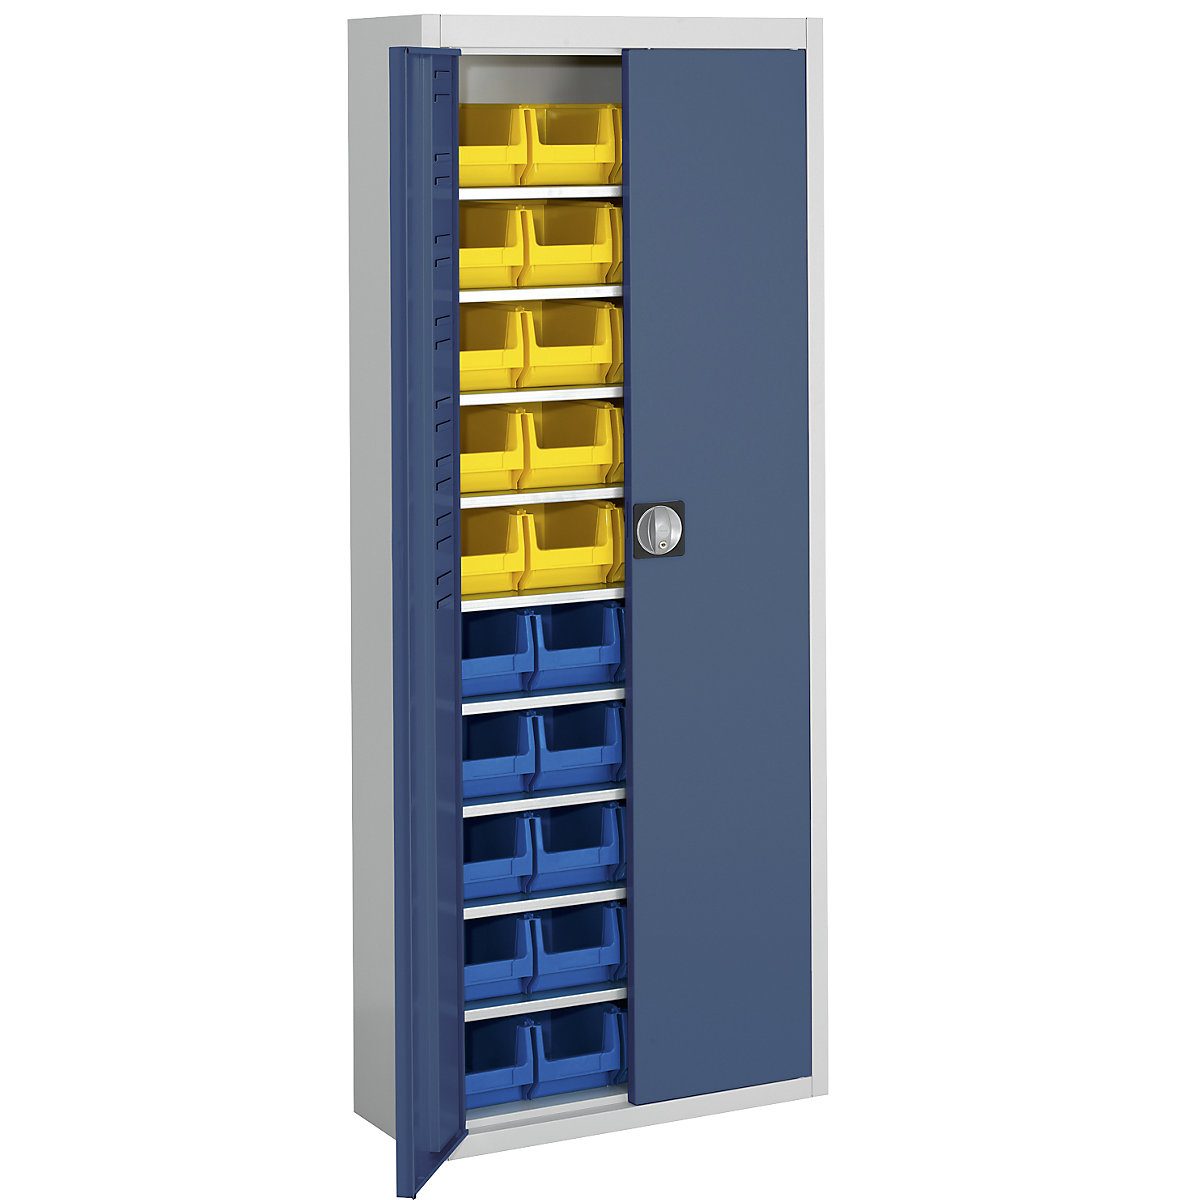 Storage cupboard with open fronted storage bins – mauser, HxWxD 1740 x 680 x 280 mm, two-colour, grey body, blue doors, 40 bins-14